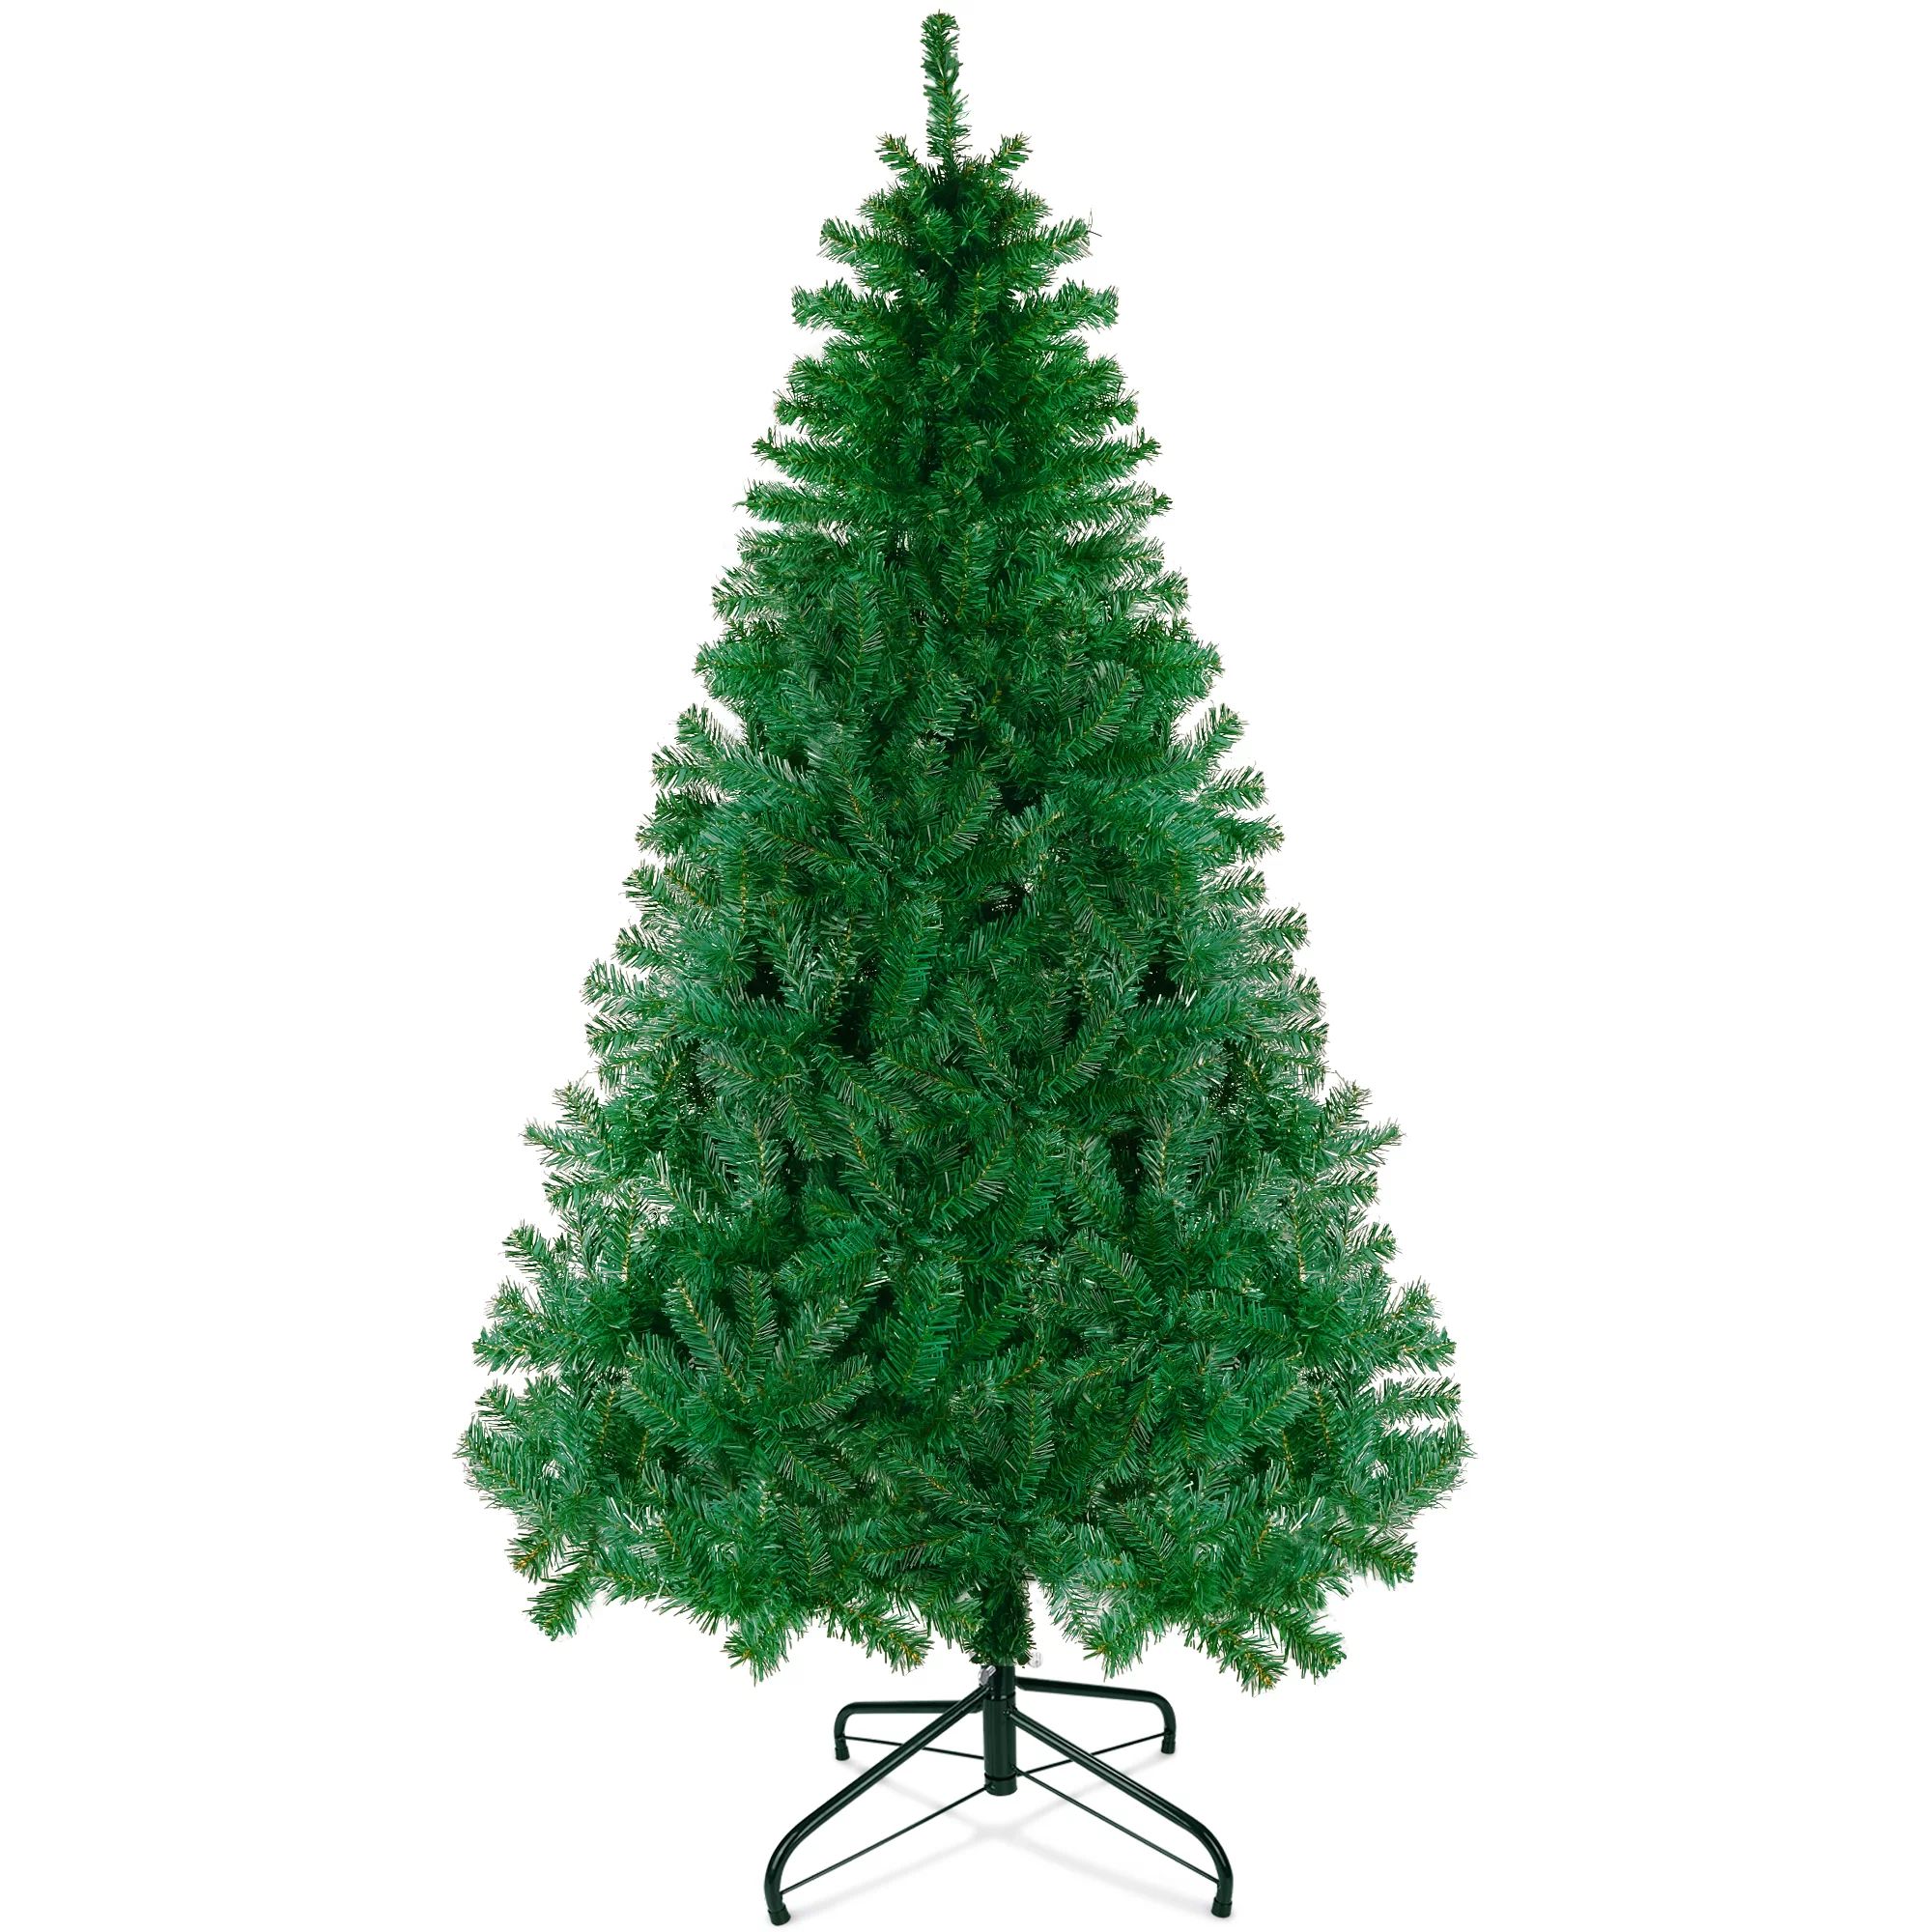 Lulive 6FT Artificial Christmas Tree W/ 800 Tips, Holiday Xmas Tree for Indoor Outdoor Decor, Fir... | Walmart (US)